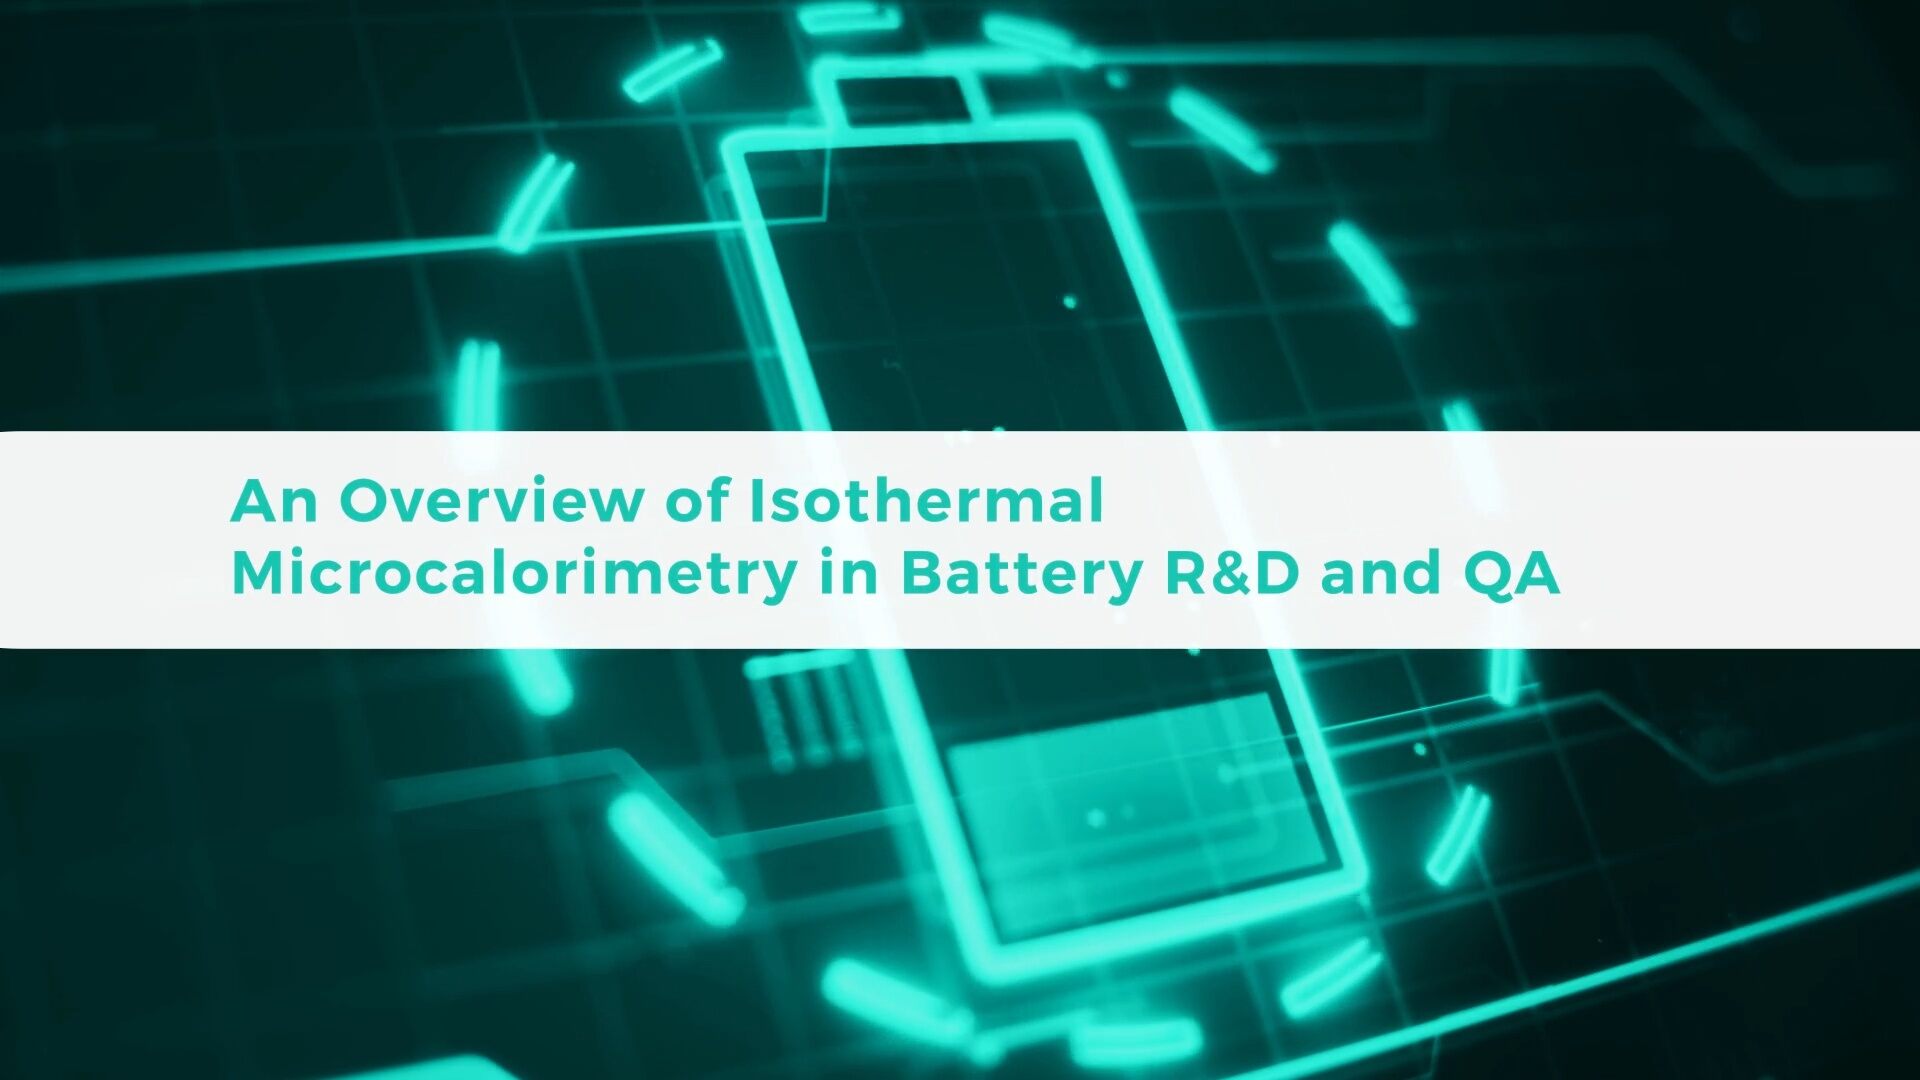 An Overview of Isothermal Microcalorimetry in Battery R&D and QA